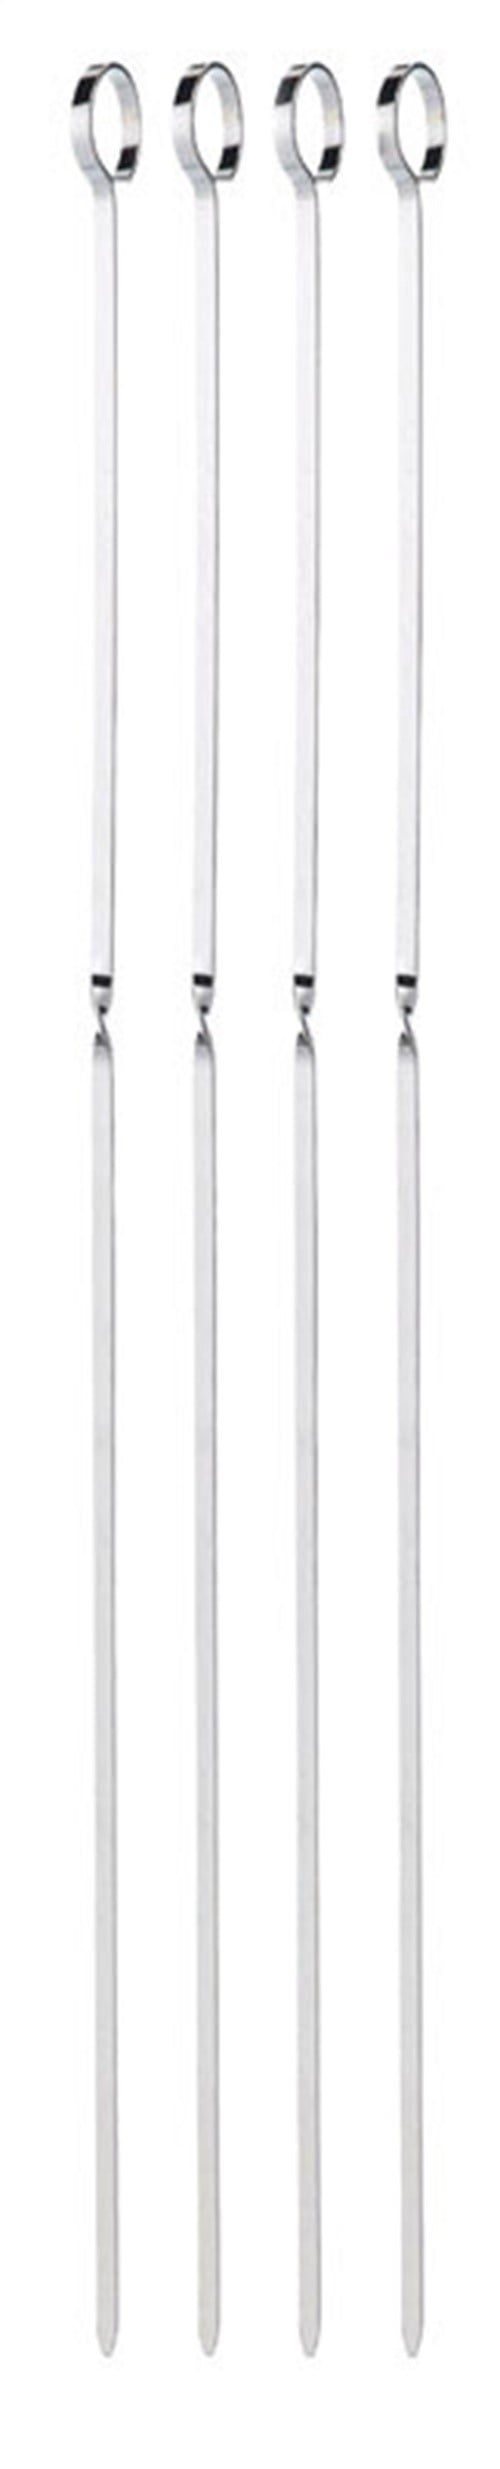 Grill Mark 12151 Steel Chrome Plated BBQ Skewers 18 L in. 